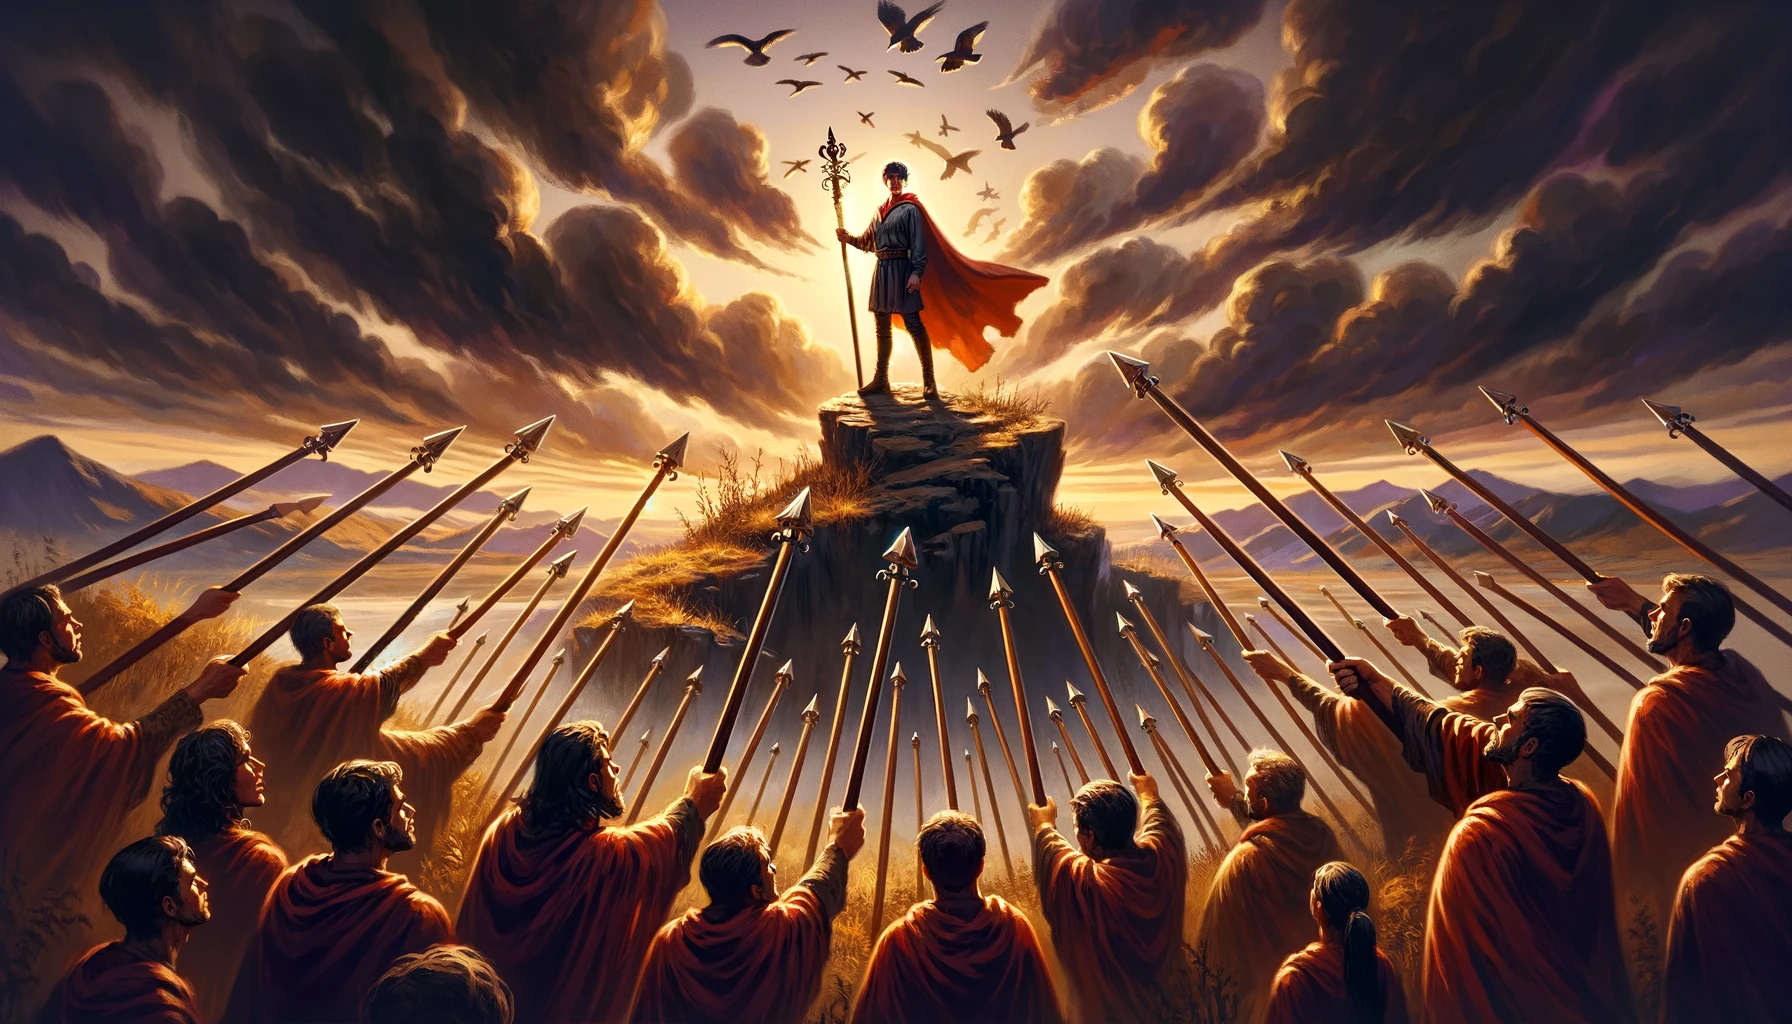 The image features a solitary figure standing tall amidst swirling shadows and fiery hues, symbolizing the tension of confronting opposition. Their stance exudes determination and resilience against challenges. The backdrop portrays a struggle, yet emphasizes the individual's steadfast resolve to prevail. The bold and fiery color palette embodies the spirit of the Seven of Wands, highlighting the intensity and courage required to stand one's ground.